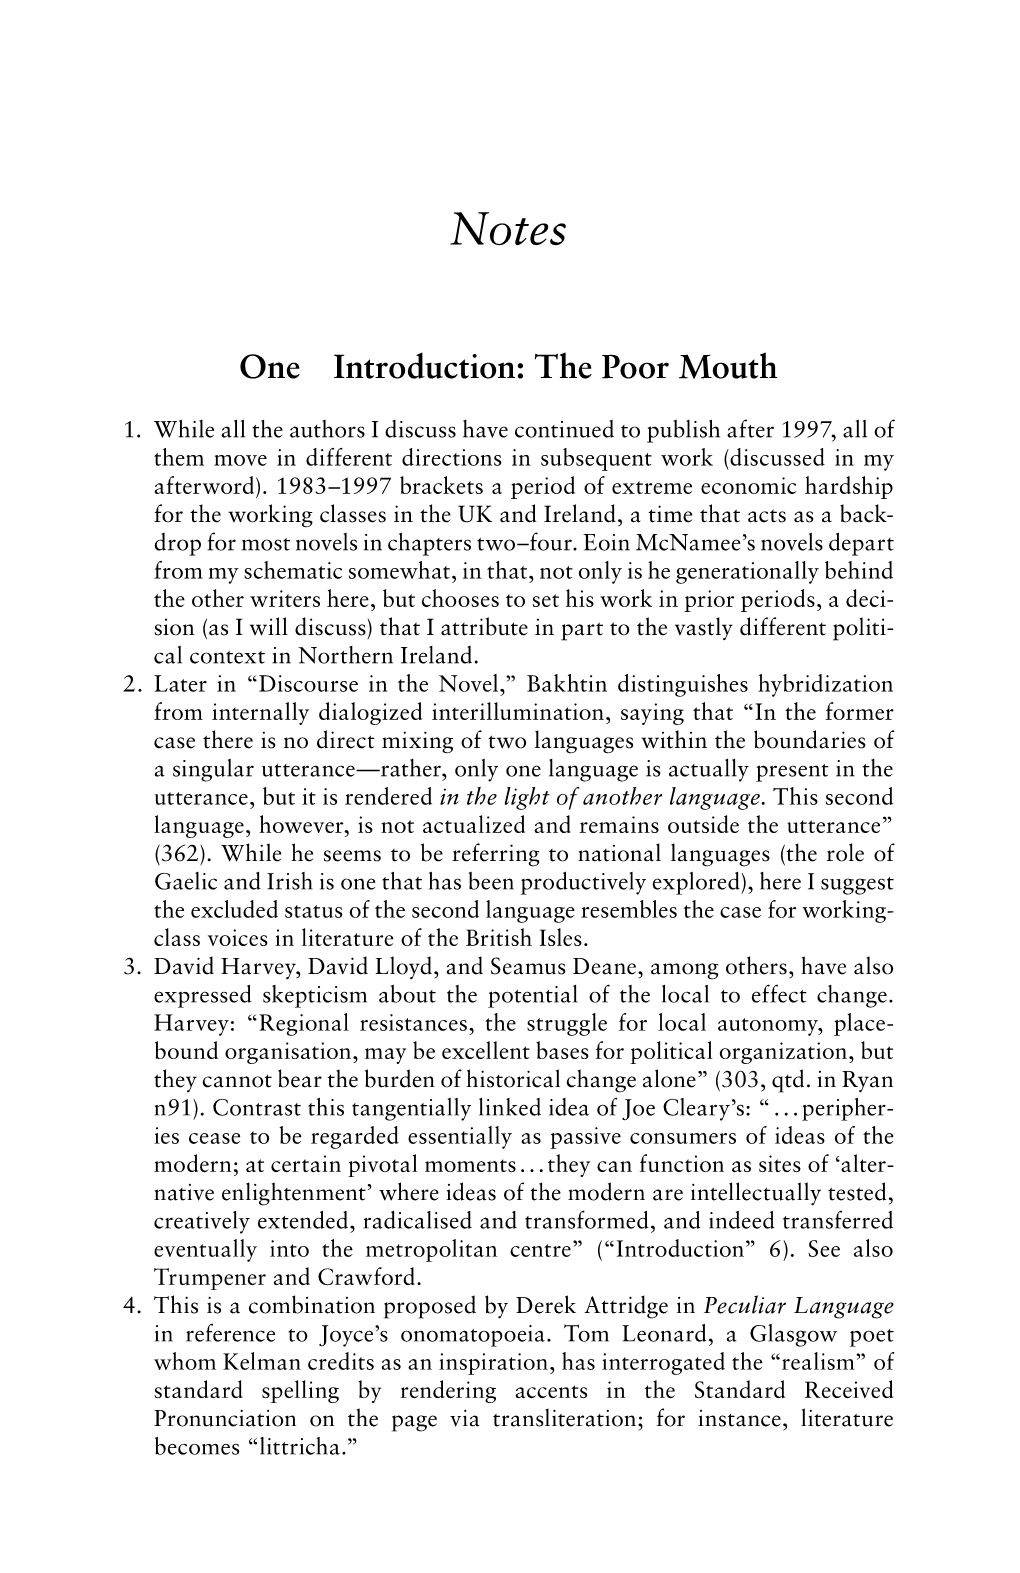 One Introduction: the Poor Mouth